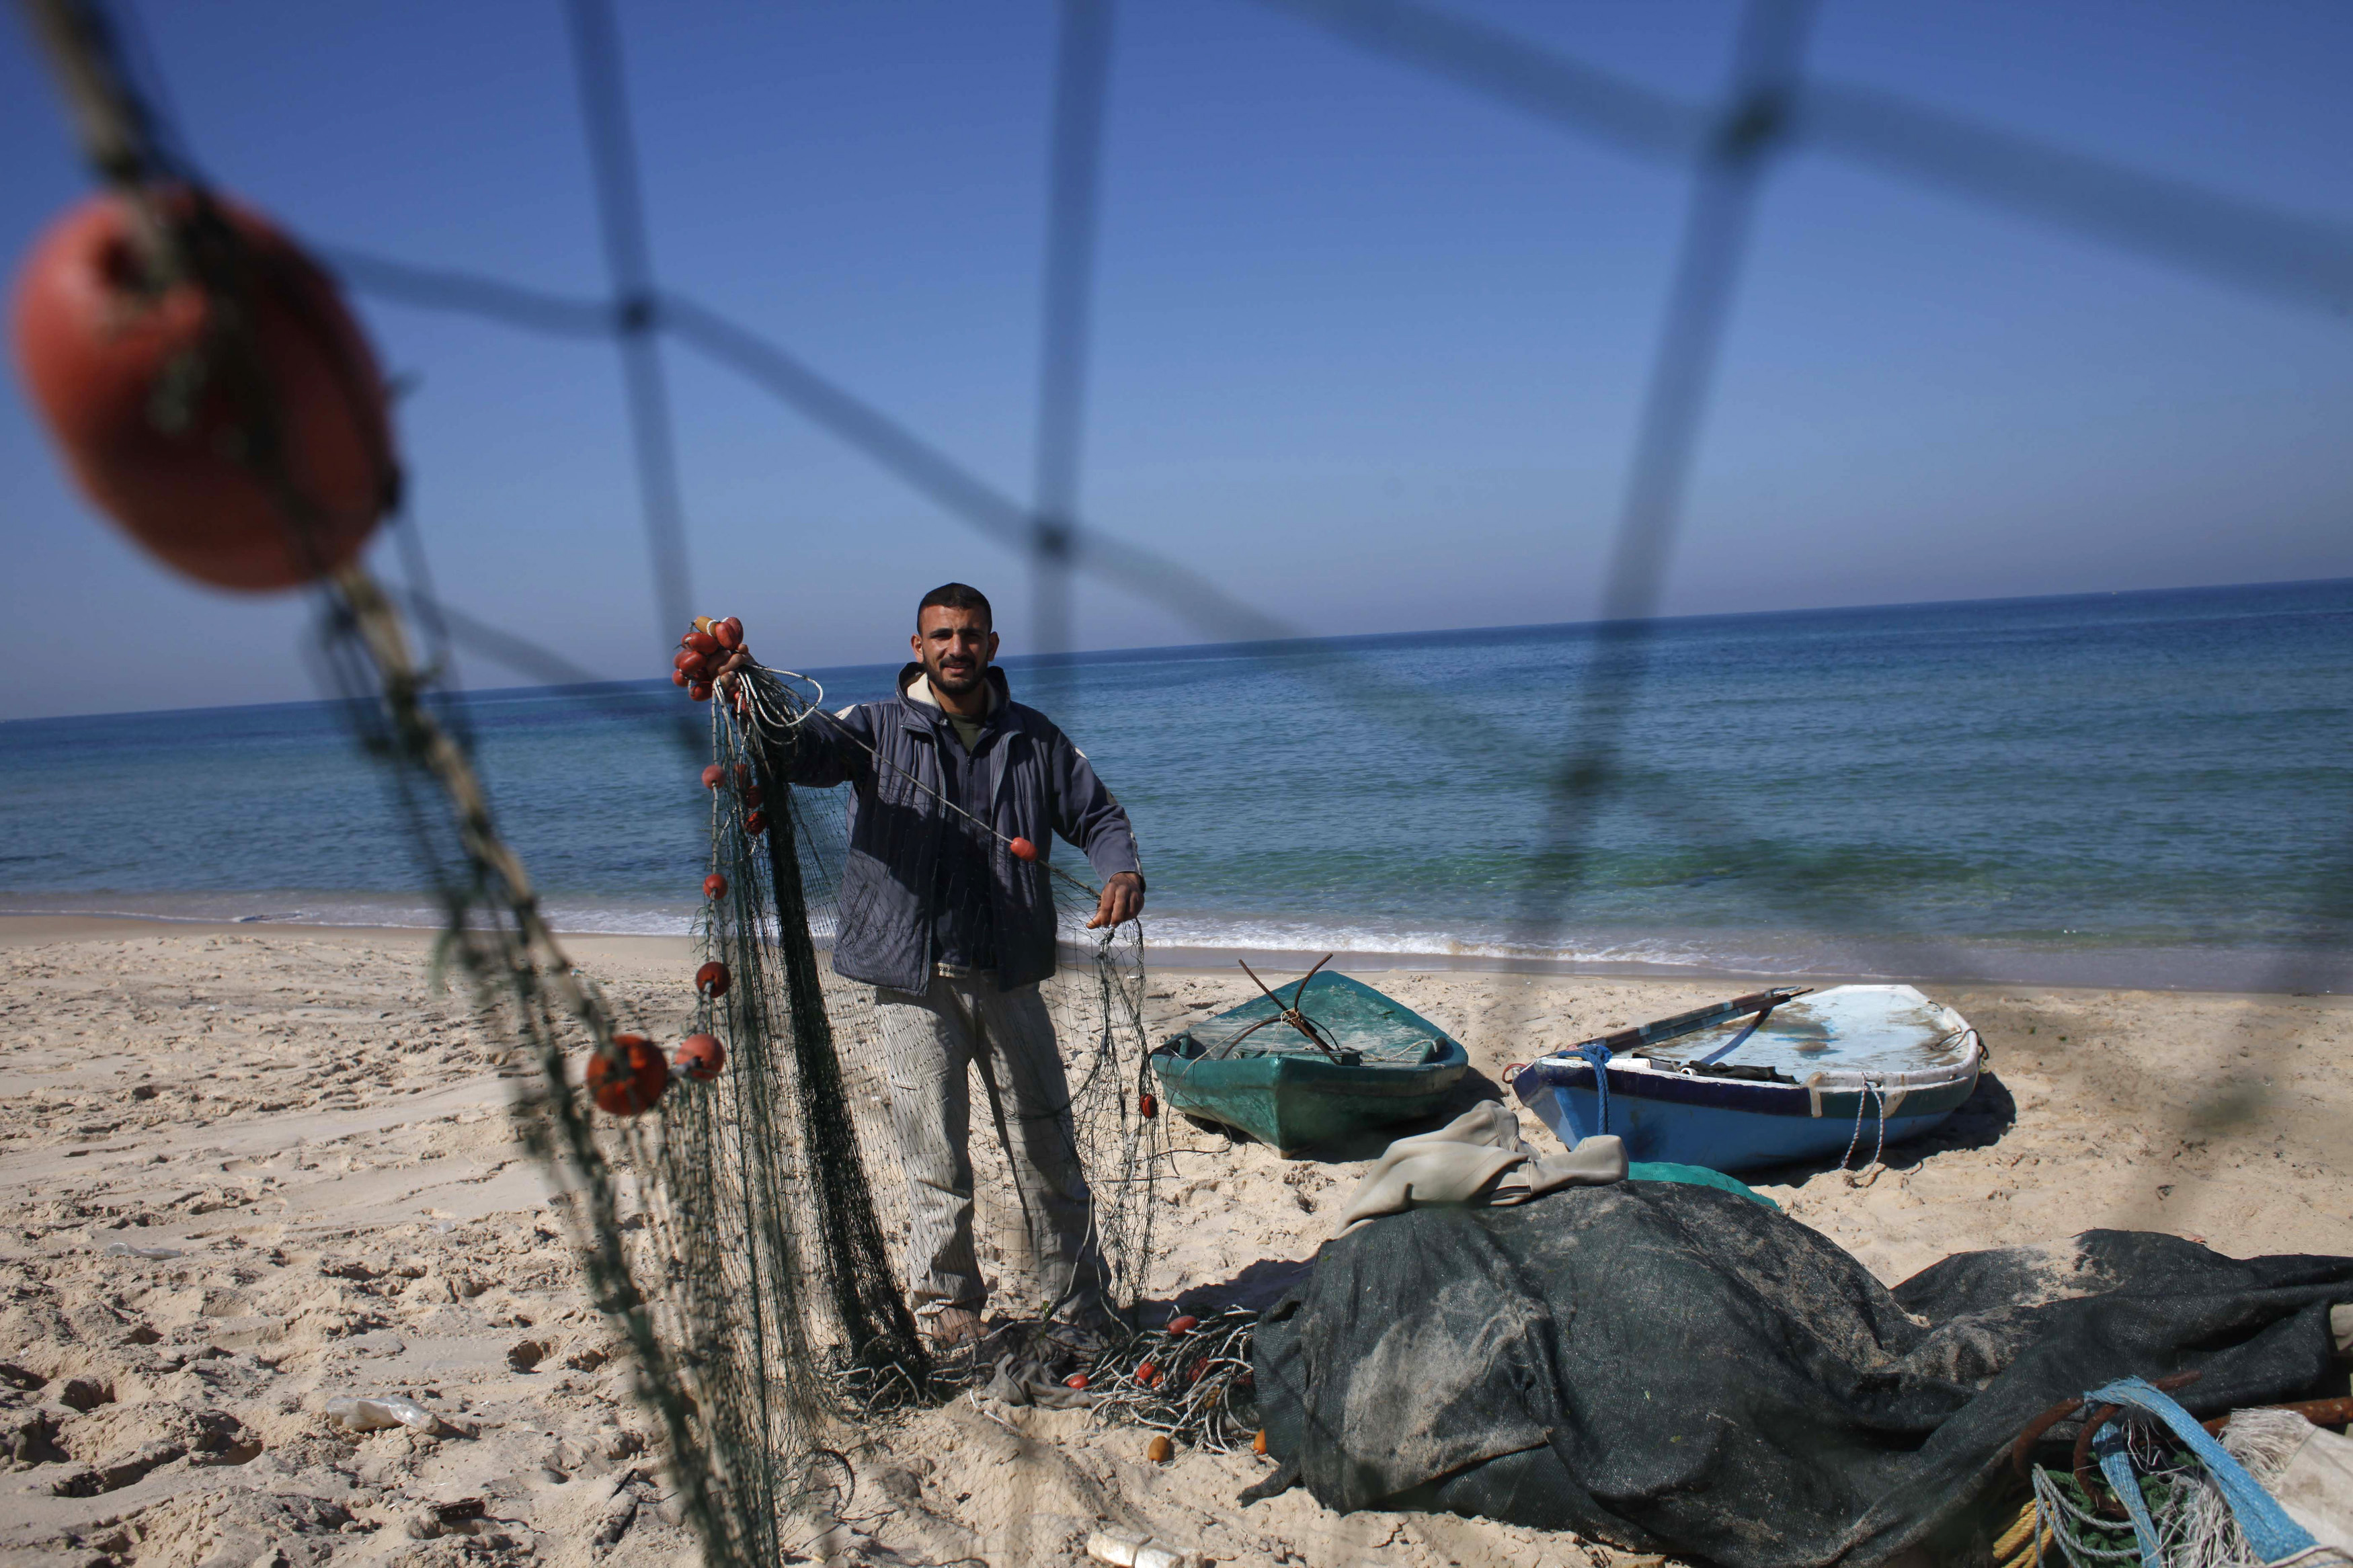 Palestinian fisherman Joudat Ghrab, who said he scooped a 500-kg bronze statue of the Greek God Apollo from the sea bed last August, prepares his fishing net on the beach of Deir El-Balah in the central Gaza Strip February 9, 2014. (Ibraheem Abu Mustafa&mdash;REUTERS)